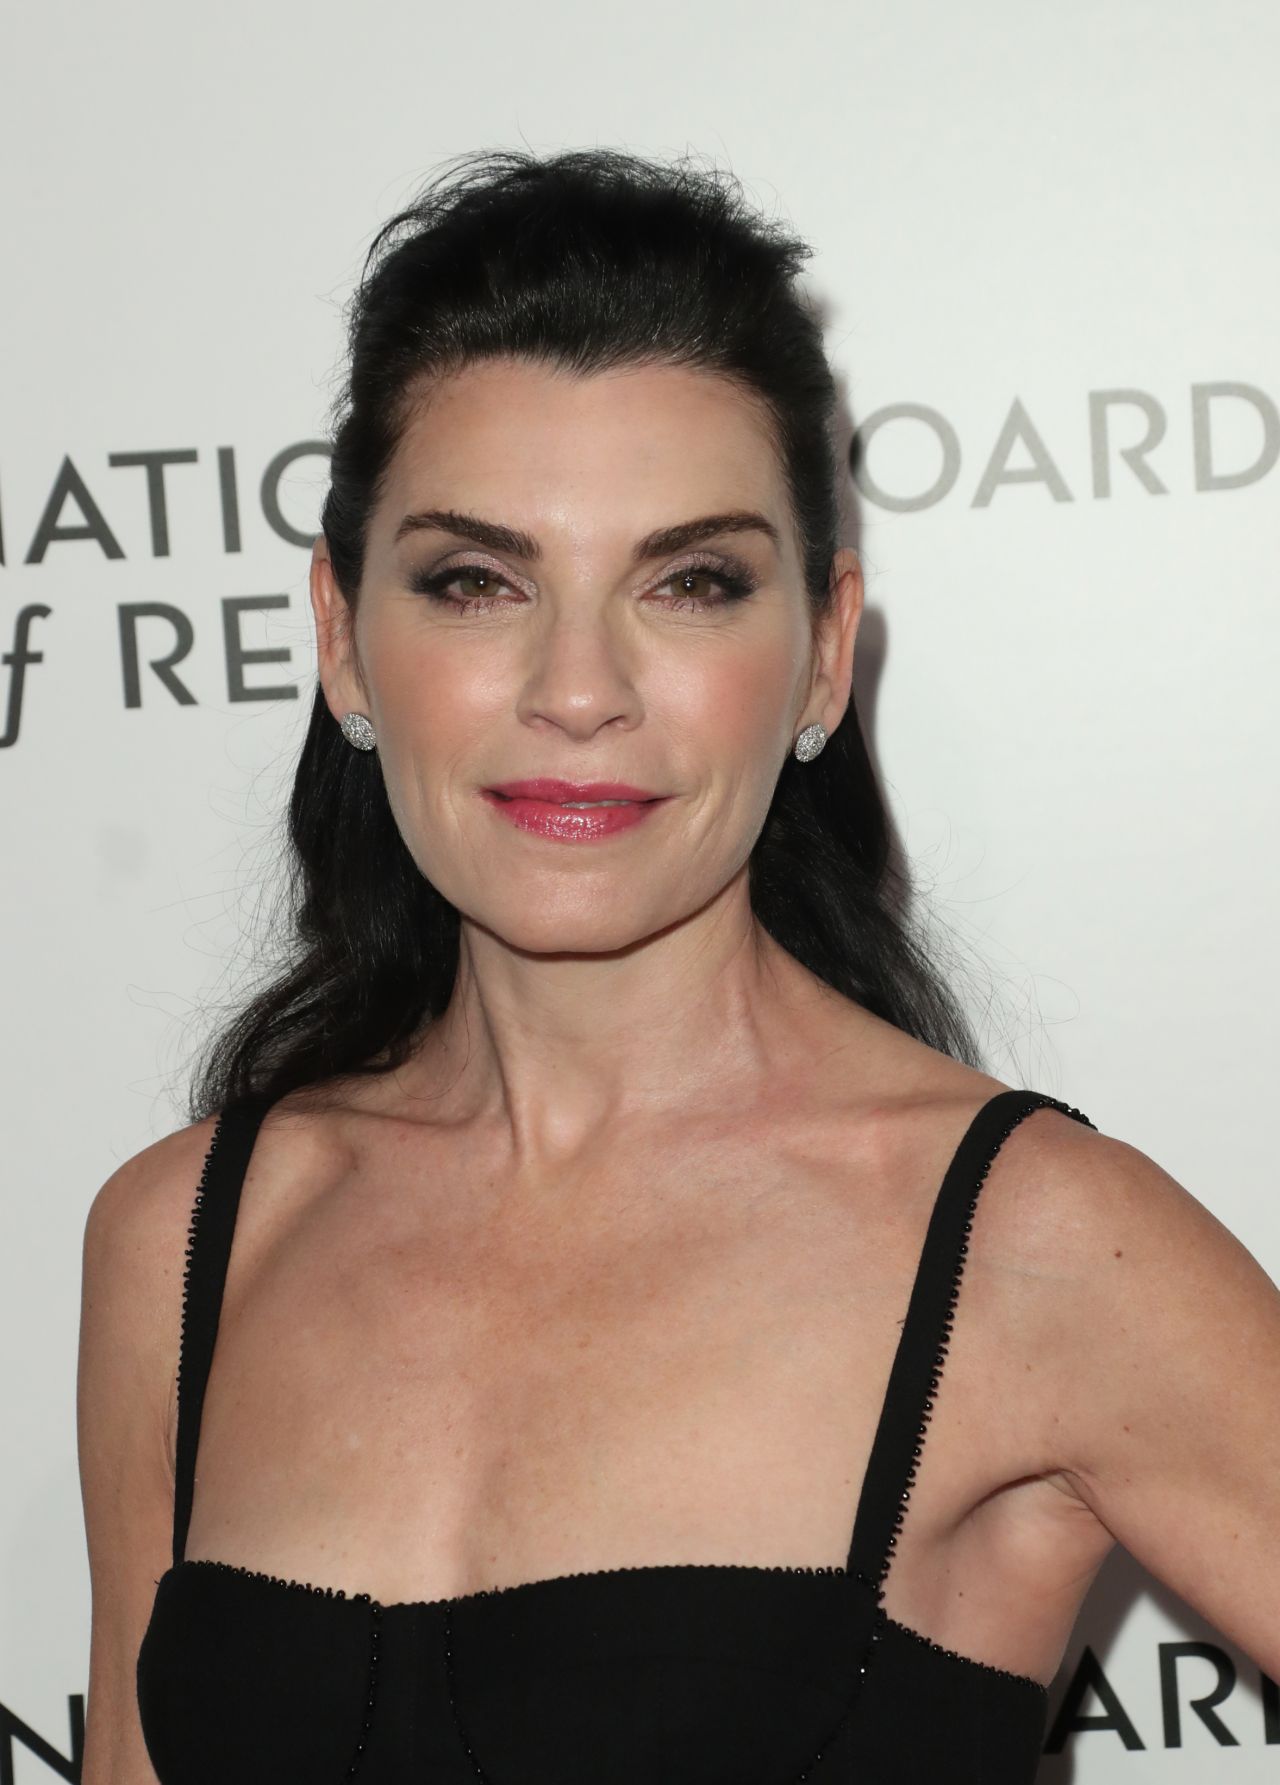 Julianna Margulies - National Board Of Review Annual Awards Gala in NYC.